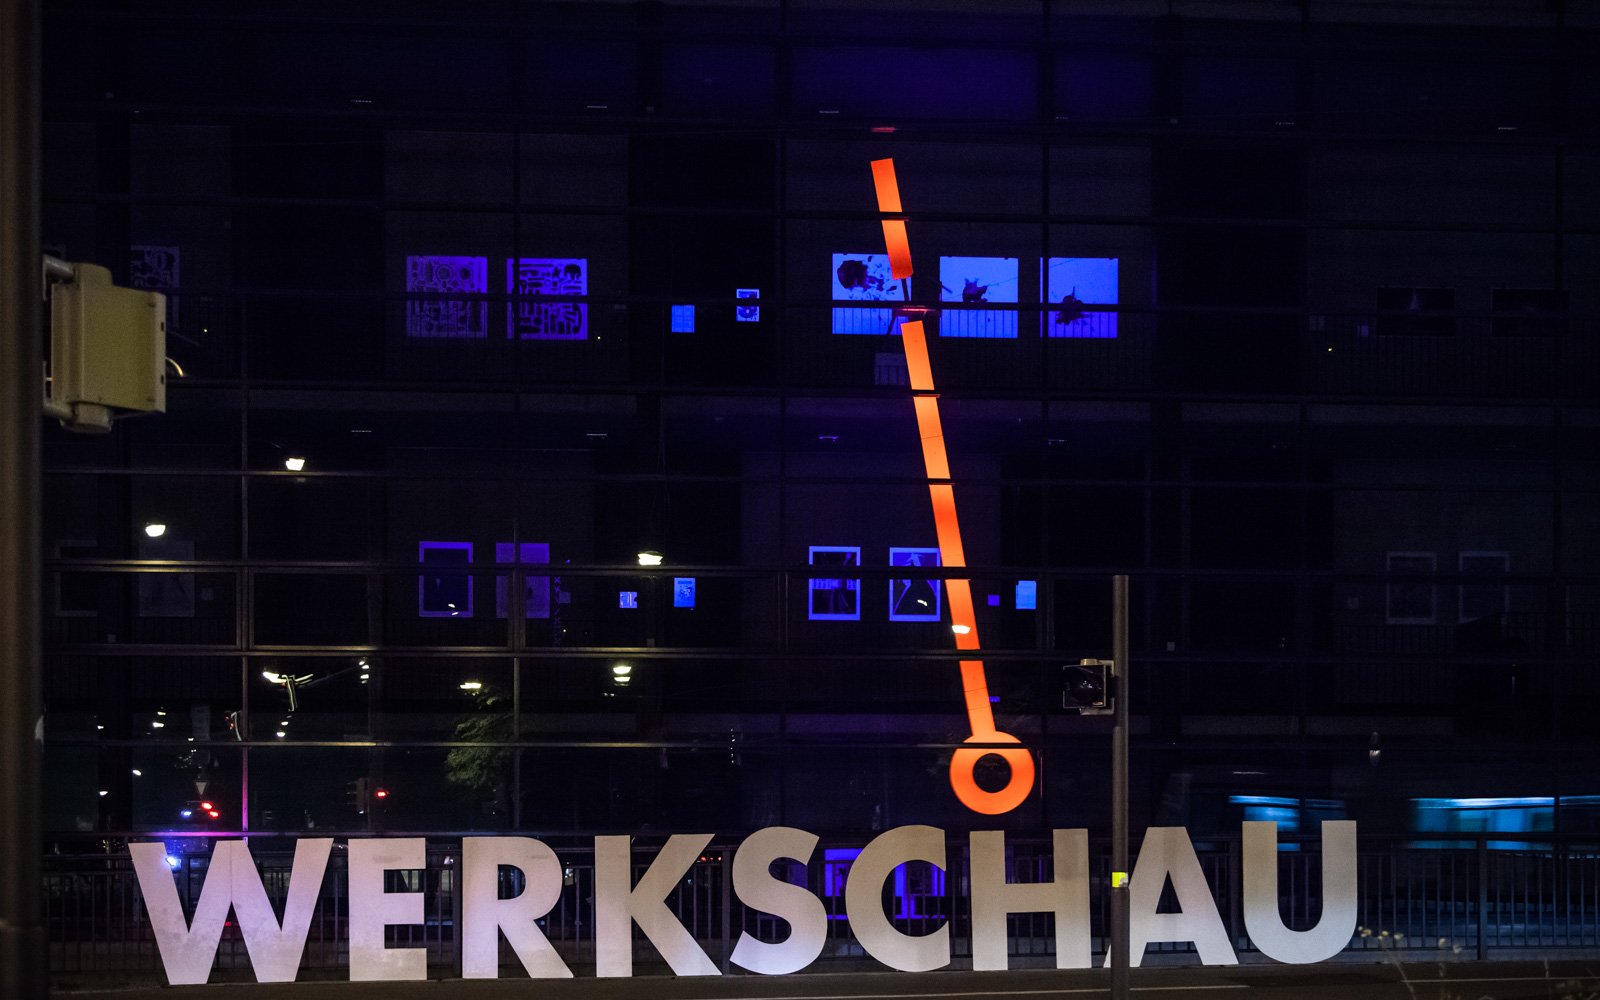 a short exposure shot at night where only the "werkschau" word and the pendulum can be seen